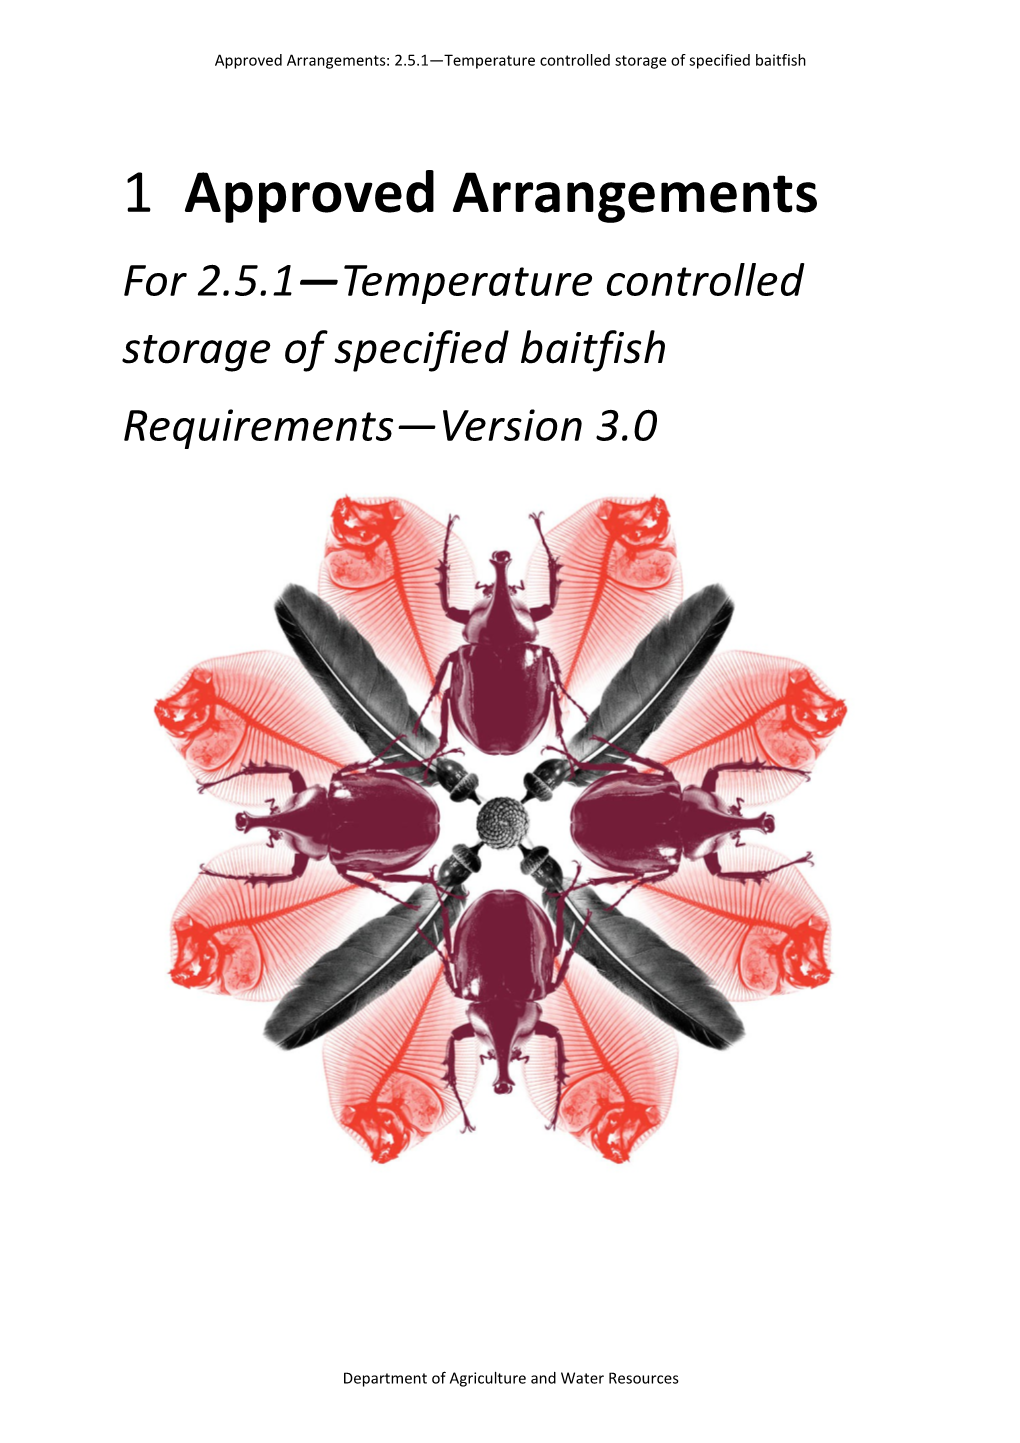 Approved Arrangements for 2.5.1 - Temperature Controlled Storage of Specifid Baitfish